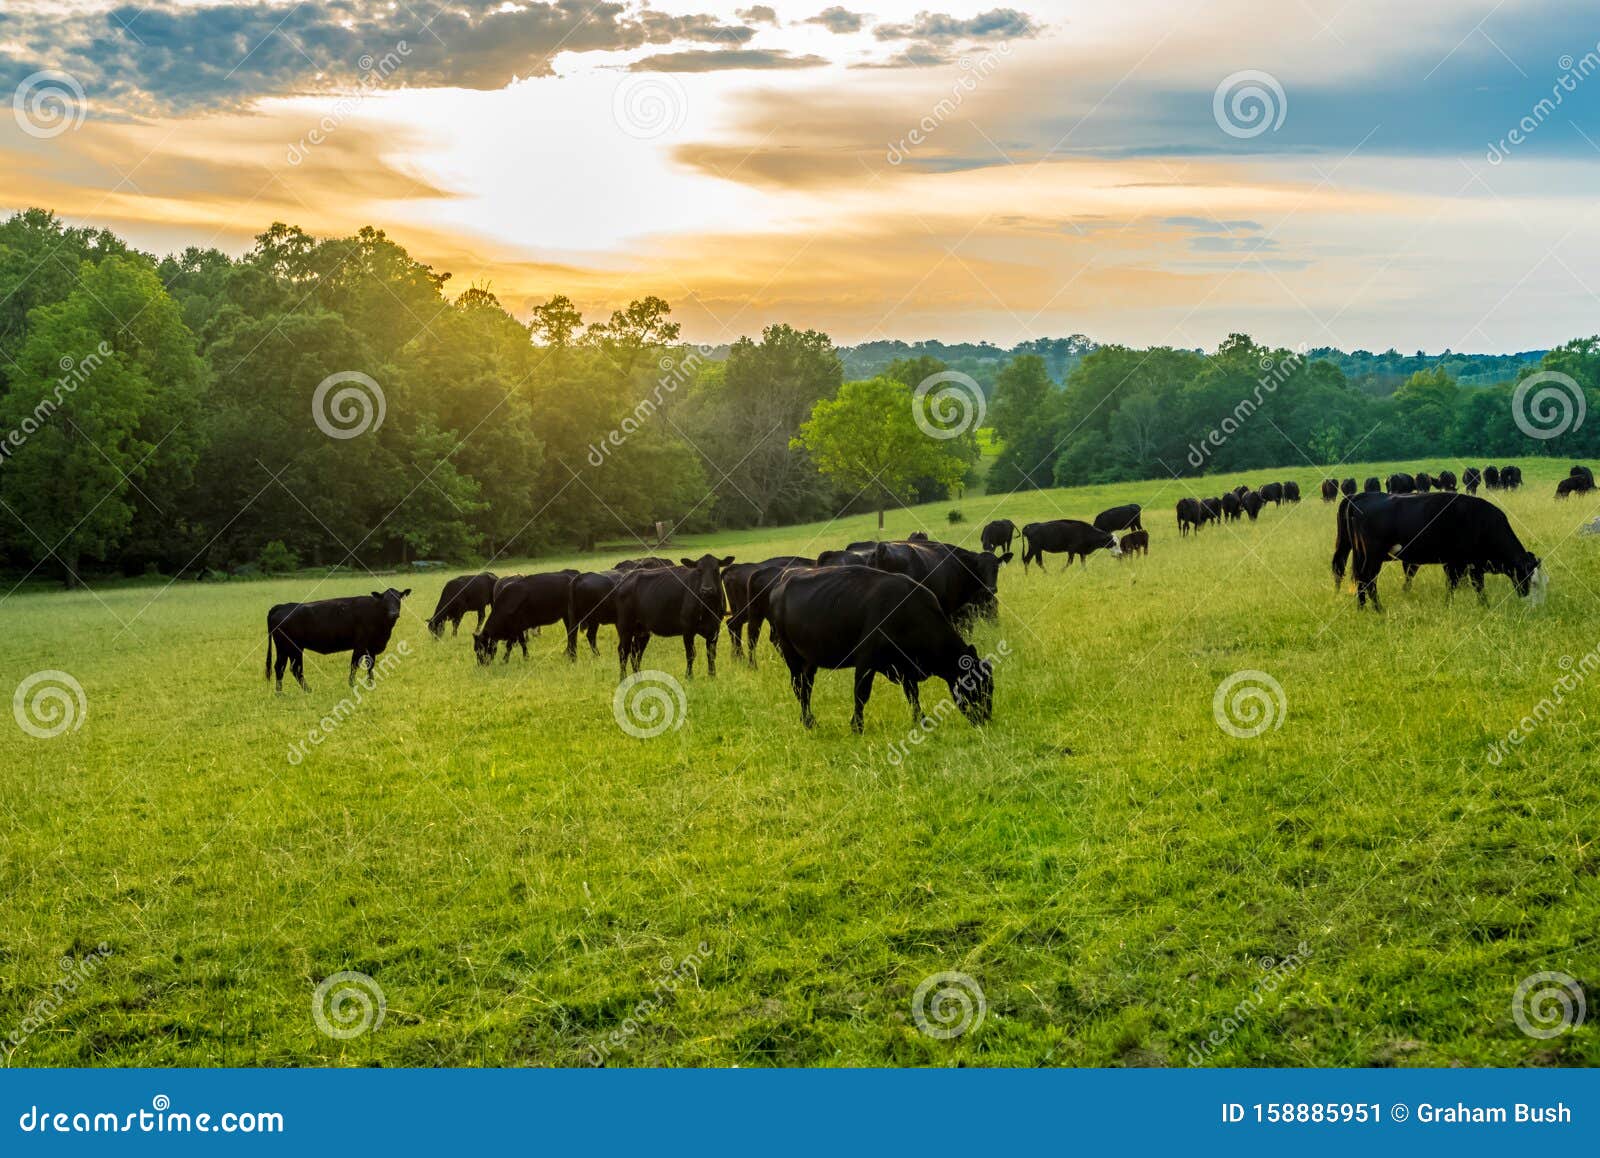 sunset on field of black cows grazing on grass